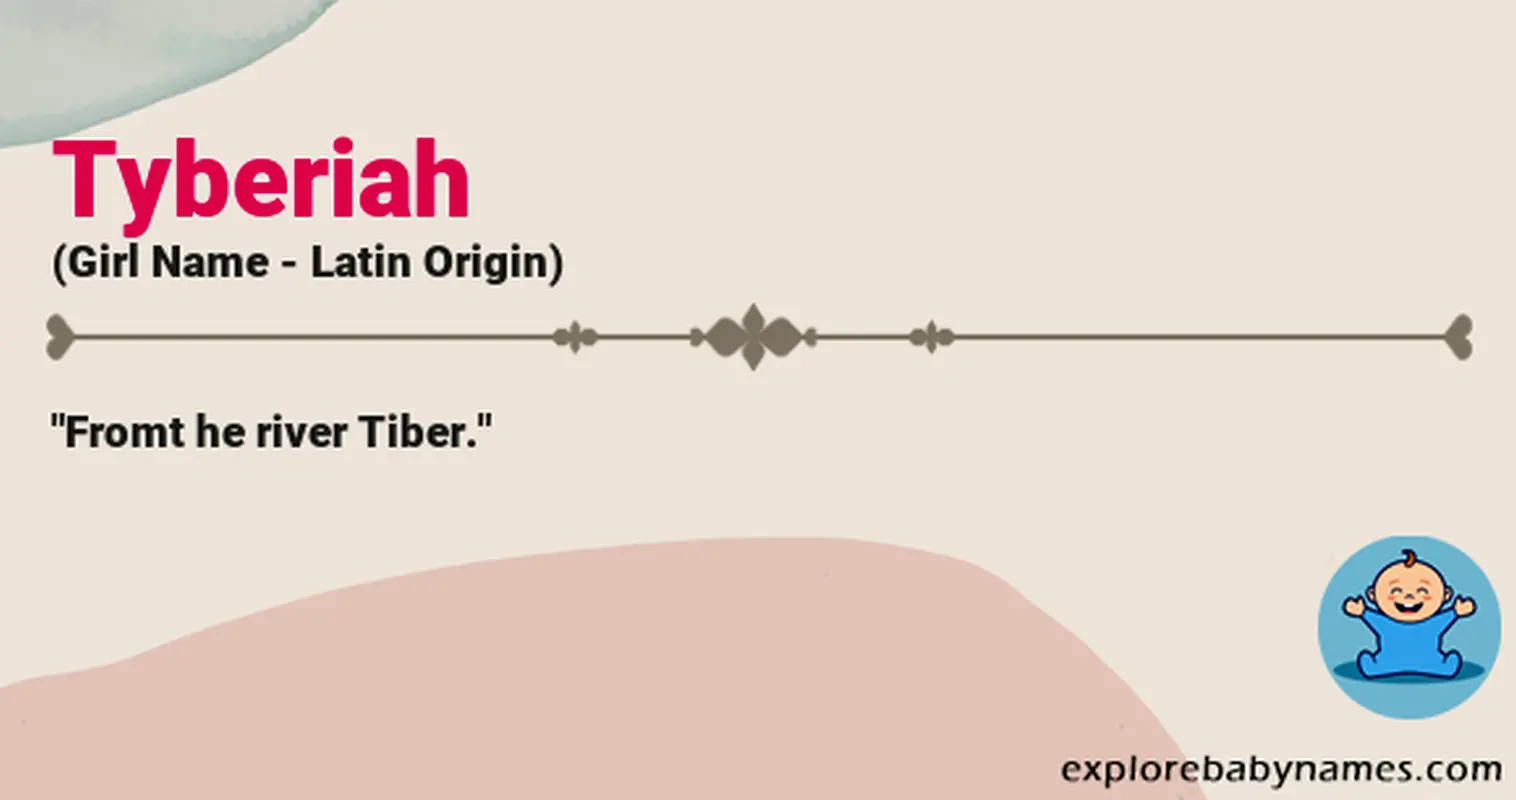 Meaning of Tyberiah